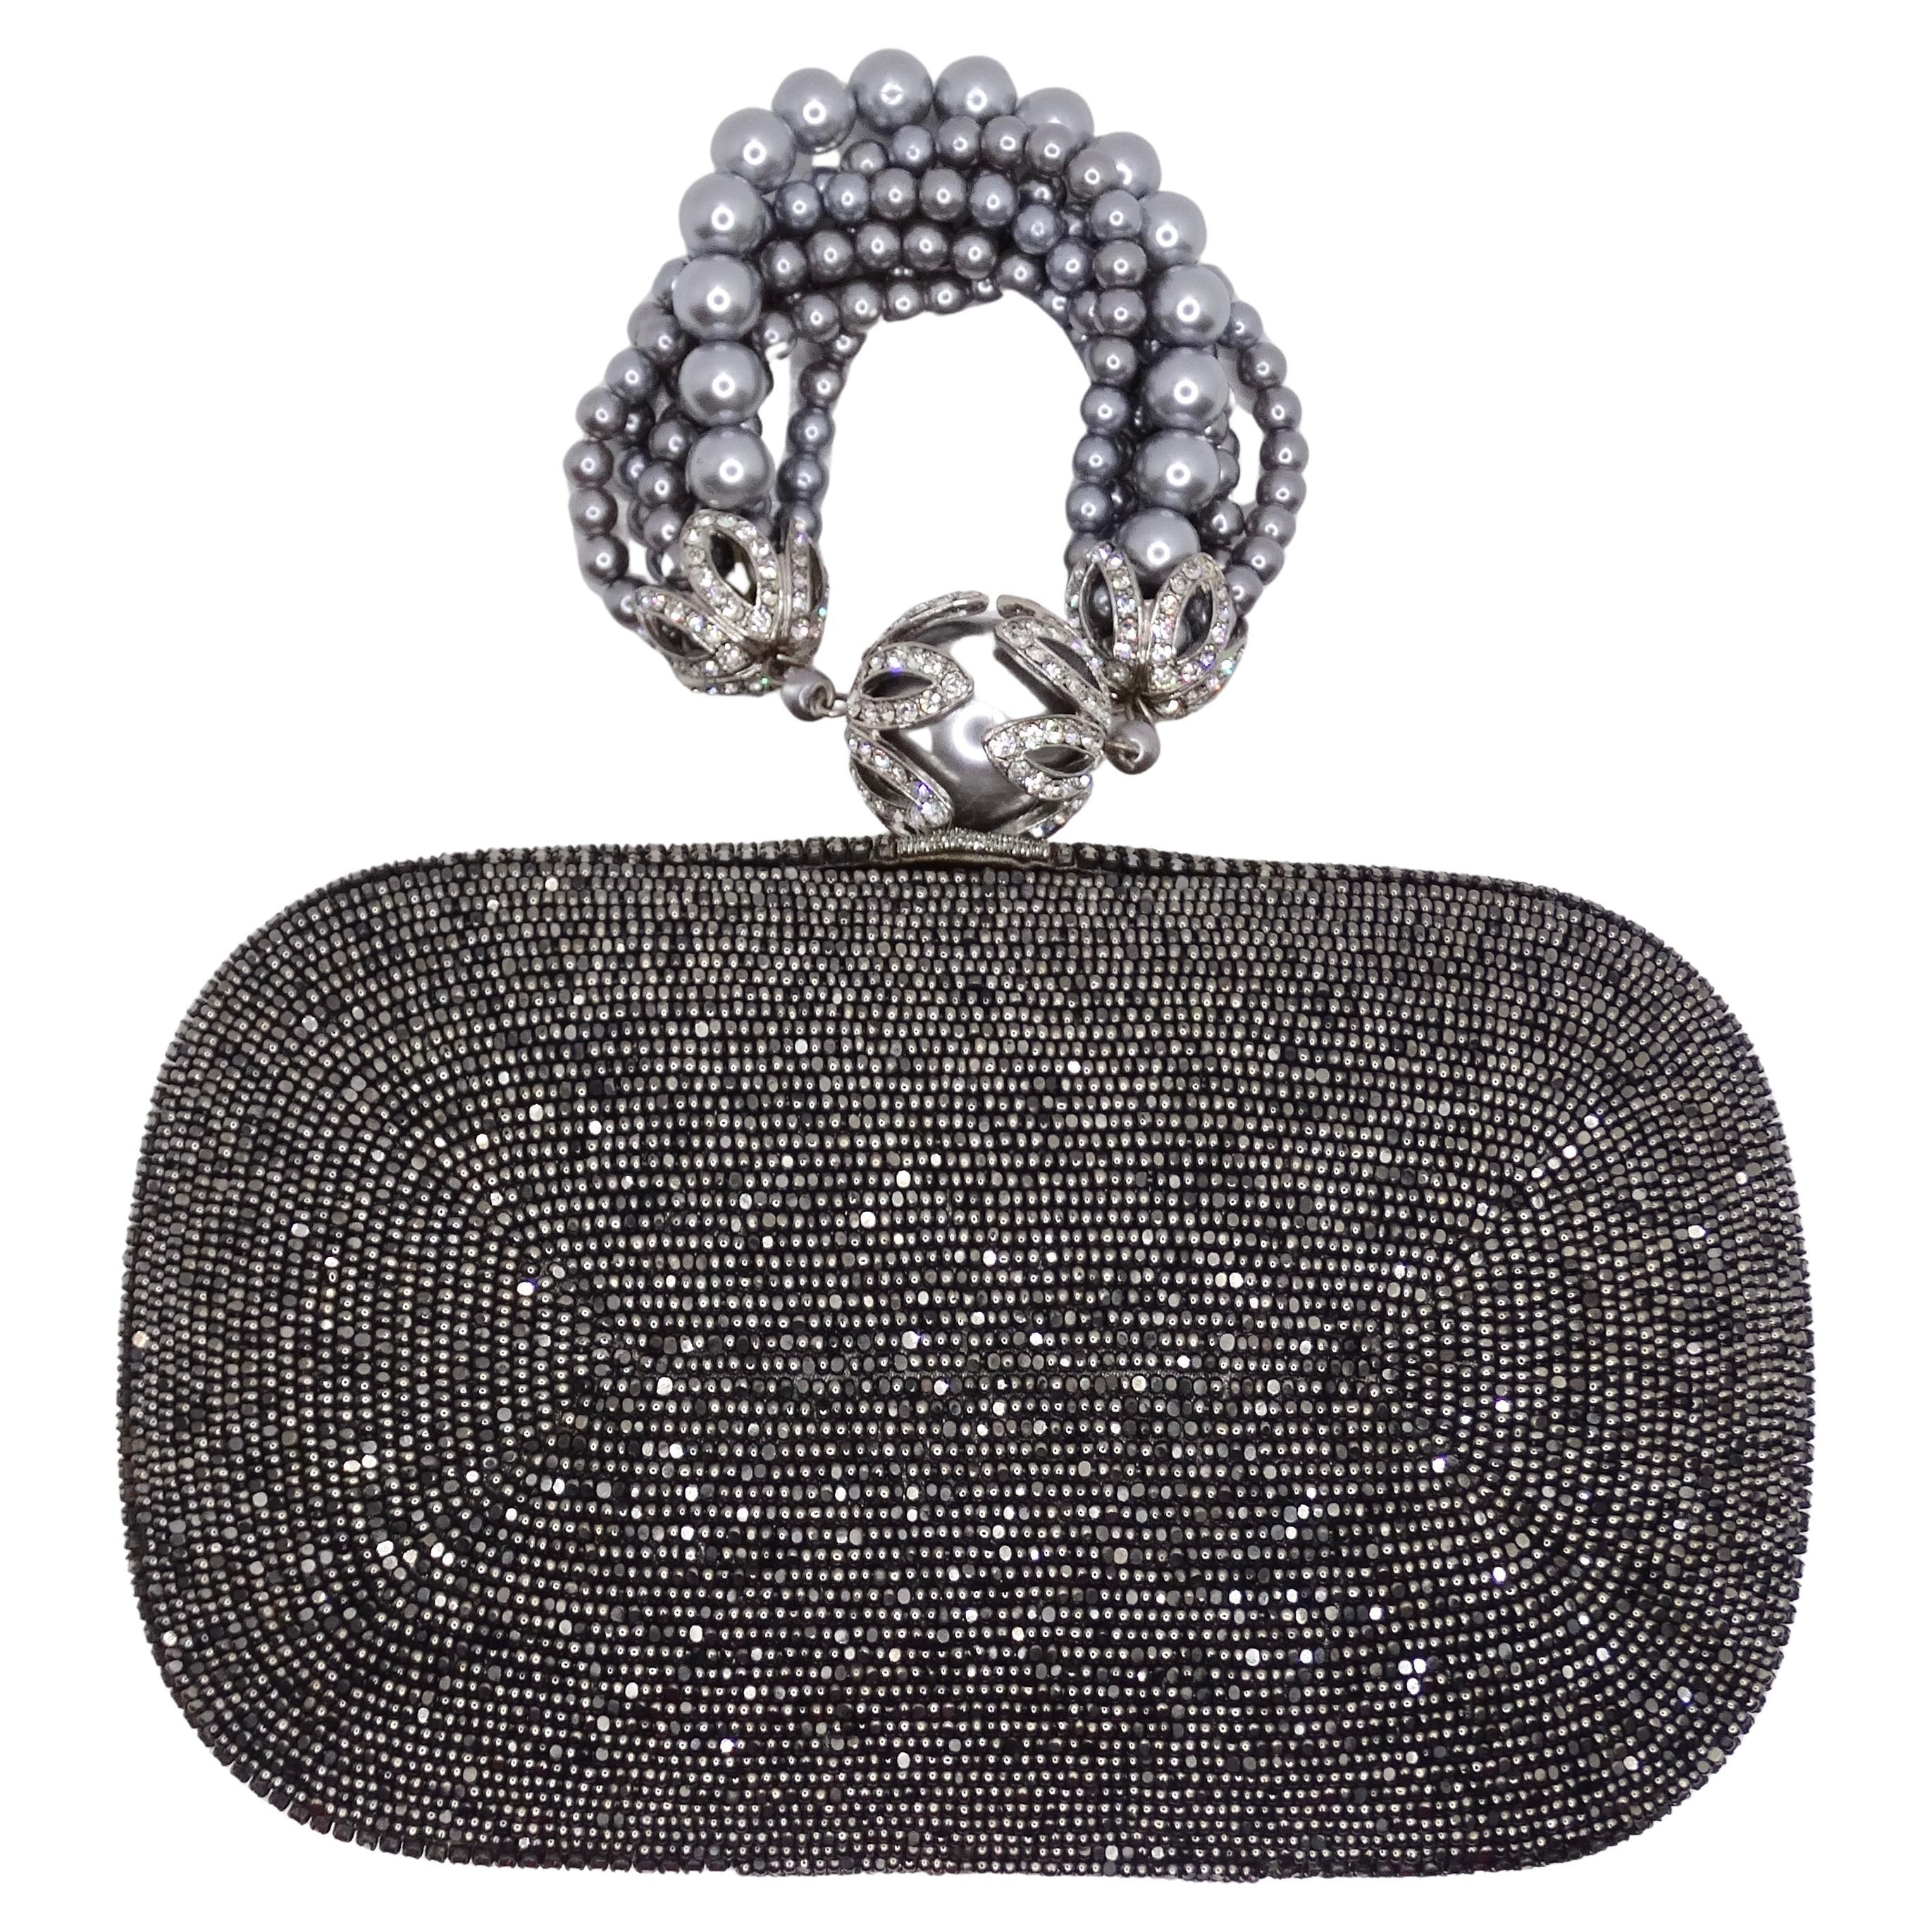 Crystal Embellished Faux Pearl Clutch Bag For Sale